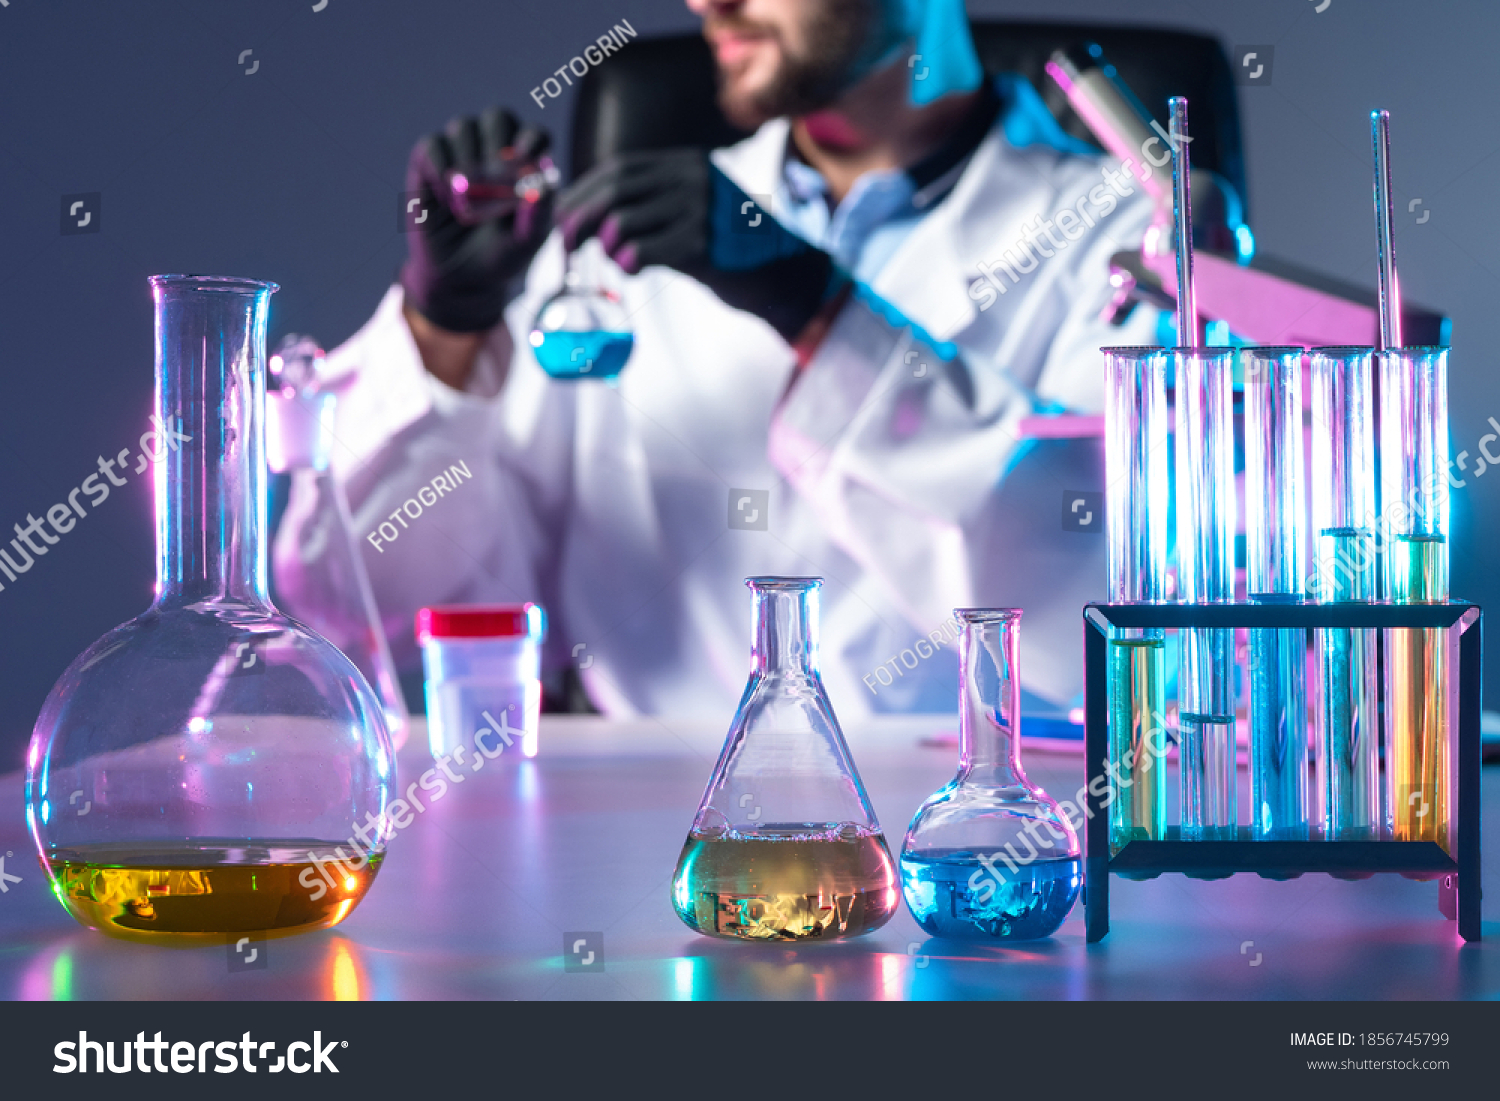 Doctor creates vaccine. Test tubes next to laboratory assistant. Doctor in background mixes liquid in test tubes. Medicine for virus is in lab glussware. He synthesizes vaccine. Vaccine test concept #1856745799